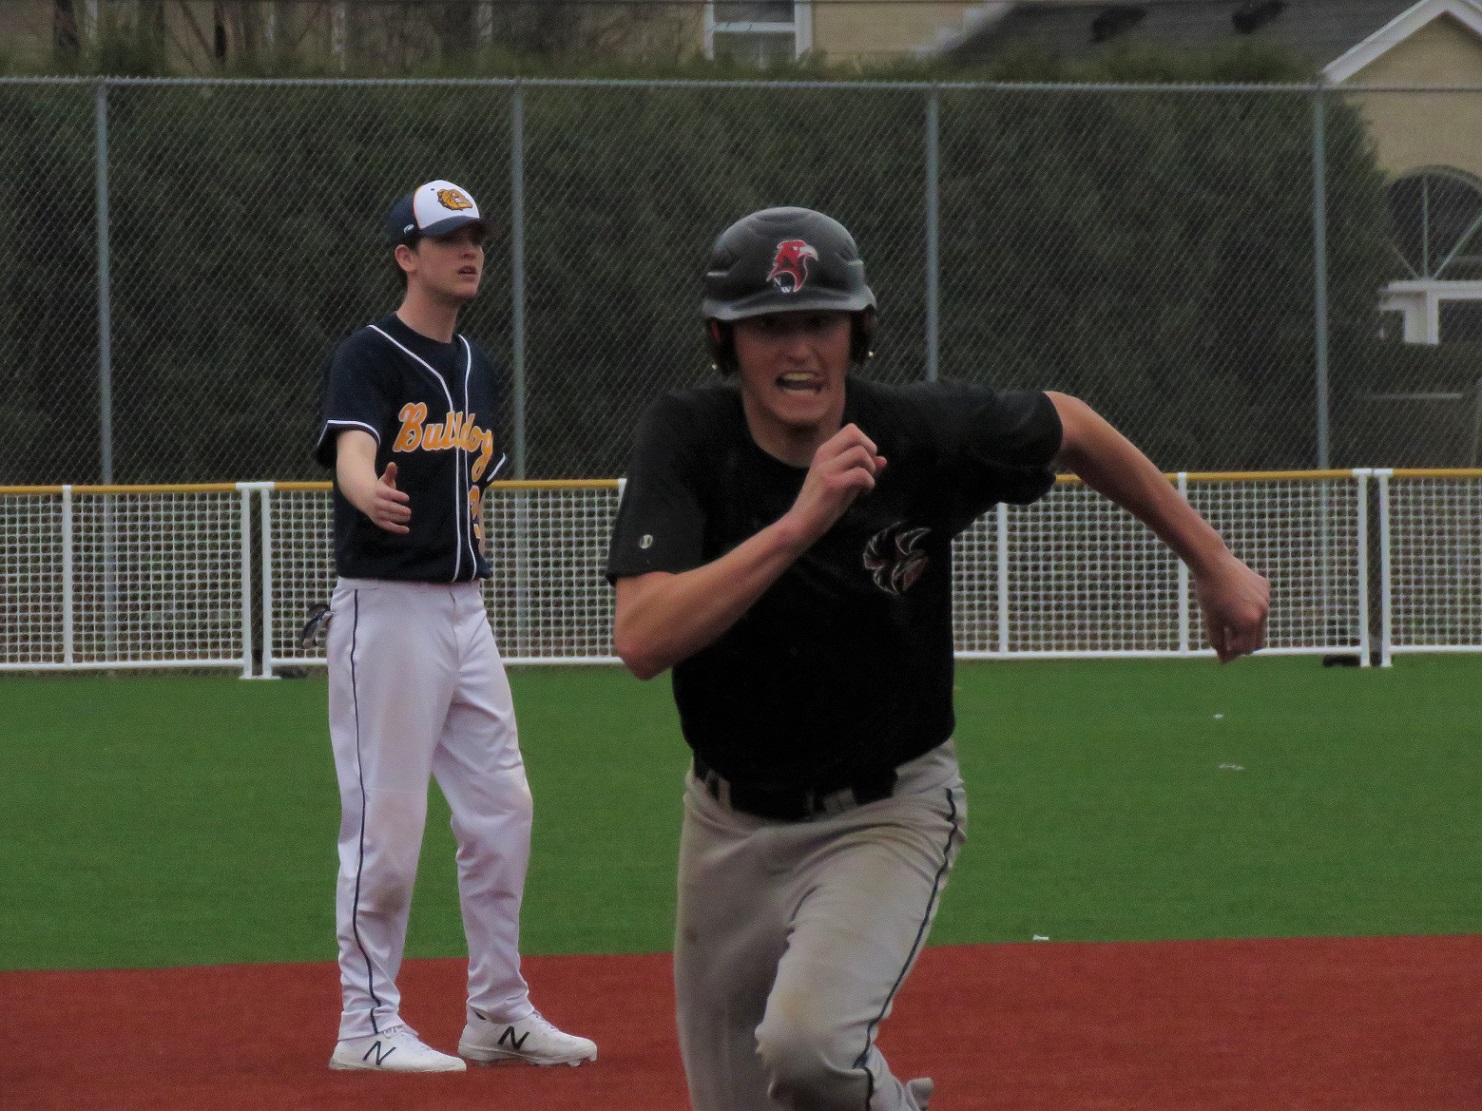 Billy Scullion of the Falcons steals third base for a second time. Scullion had three stolen bases and also scored three runs in the Falcons' 15-7 win over Kenmore East. (Photo by David Yarger)